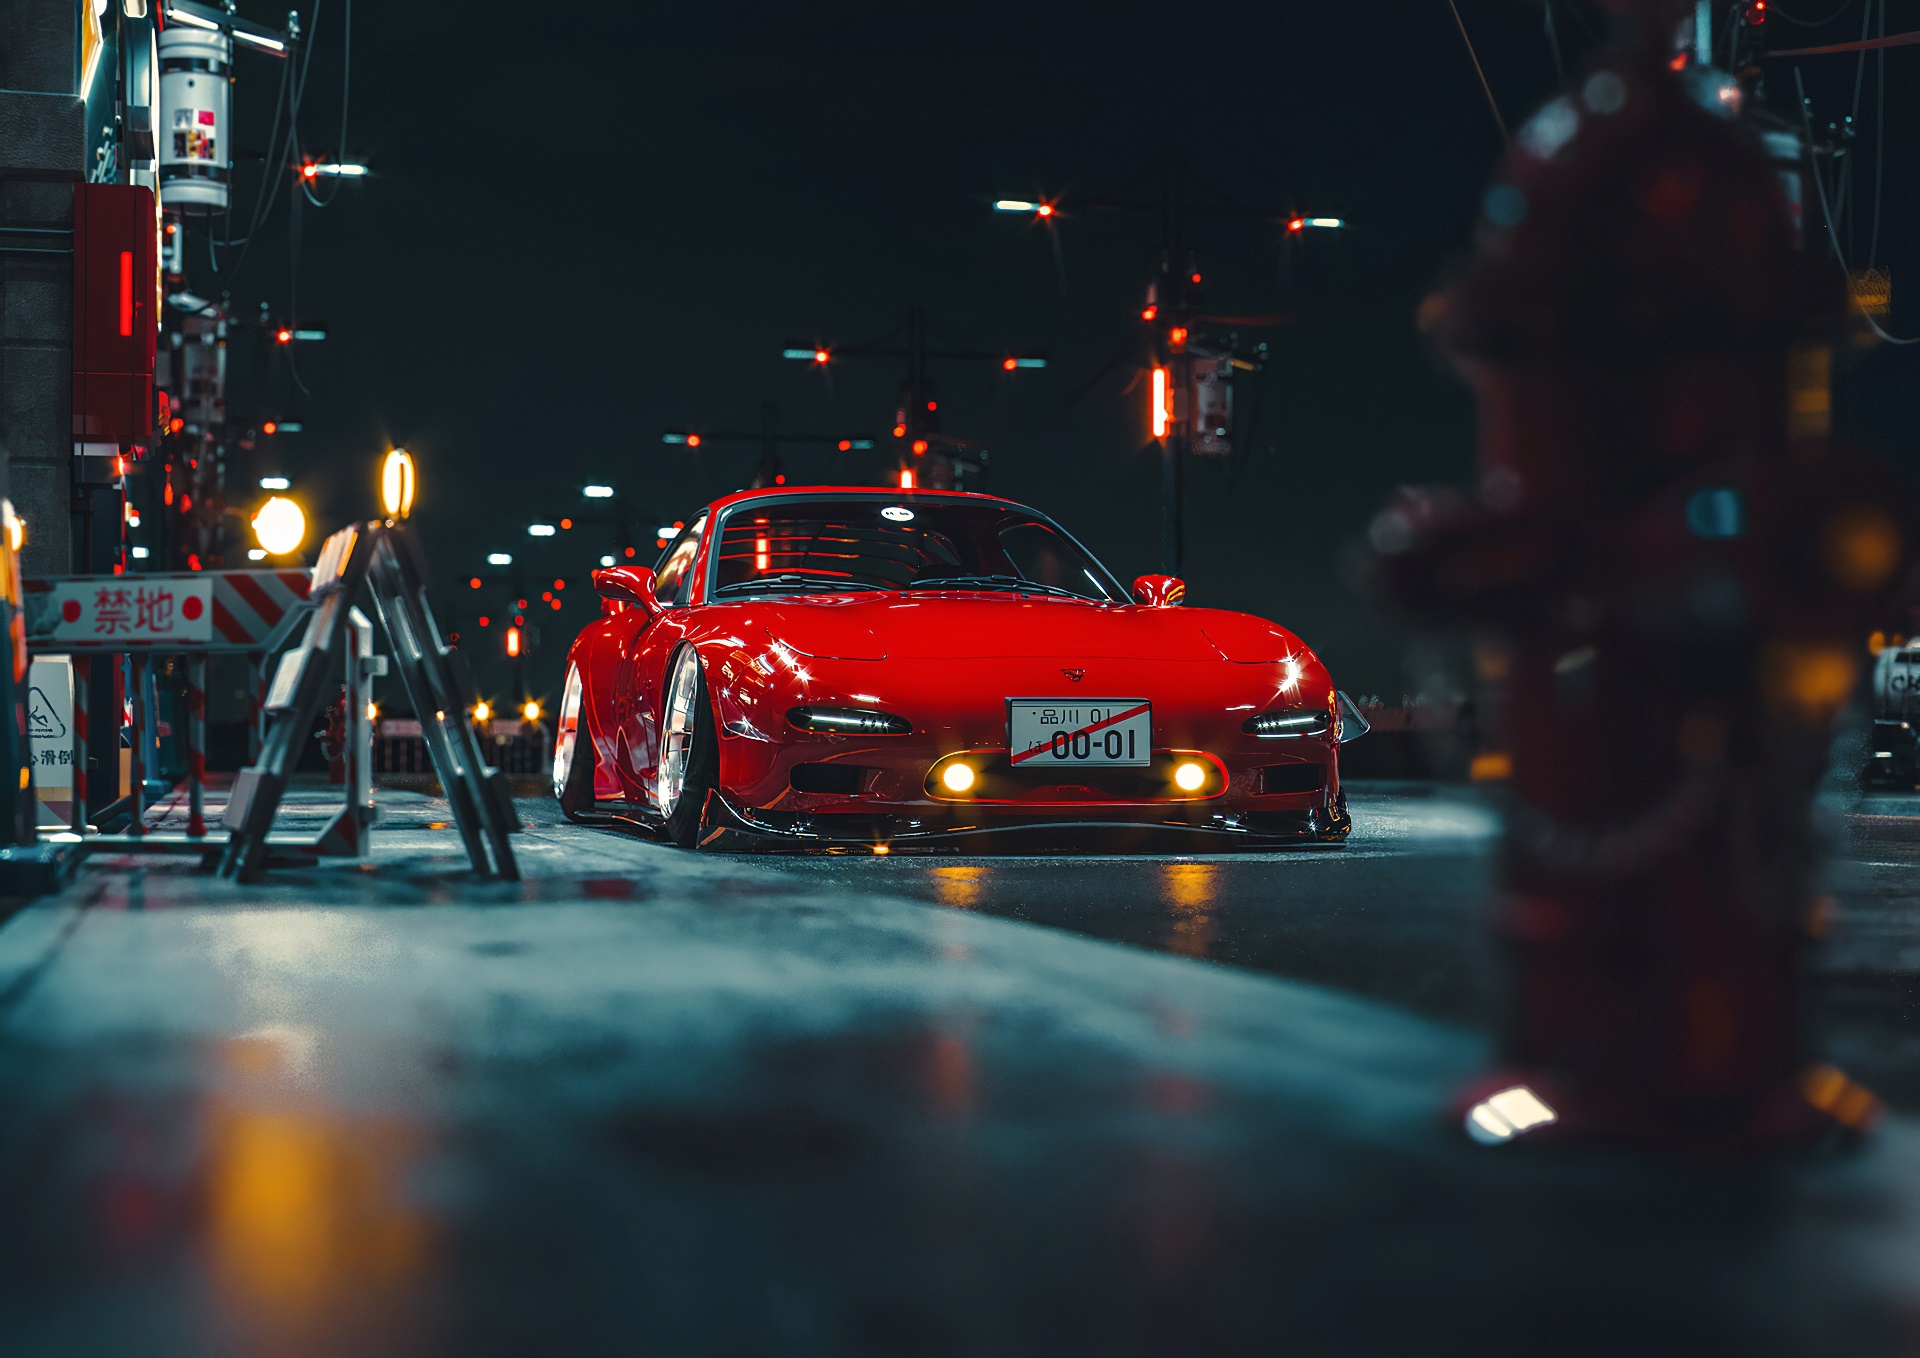 General 1920x1358 Mazda RX-7 car night vehicle red cars Mazda stanced negative camber Japanese cars street urban low-angle frontal view licence plates sky